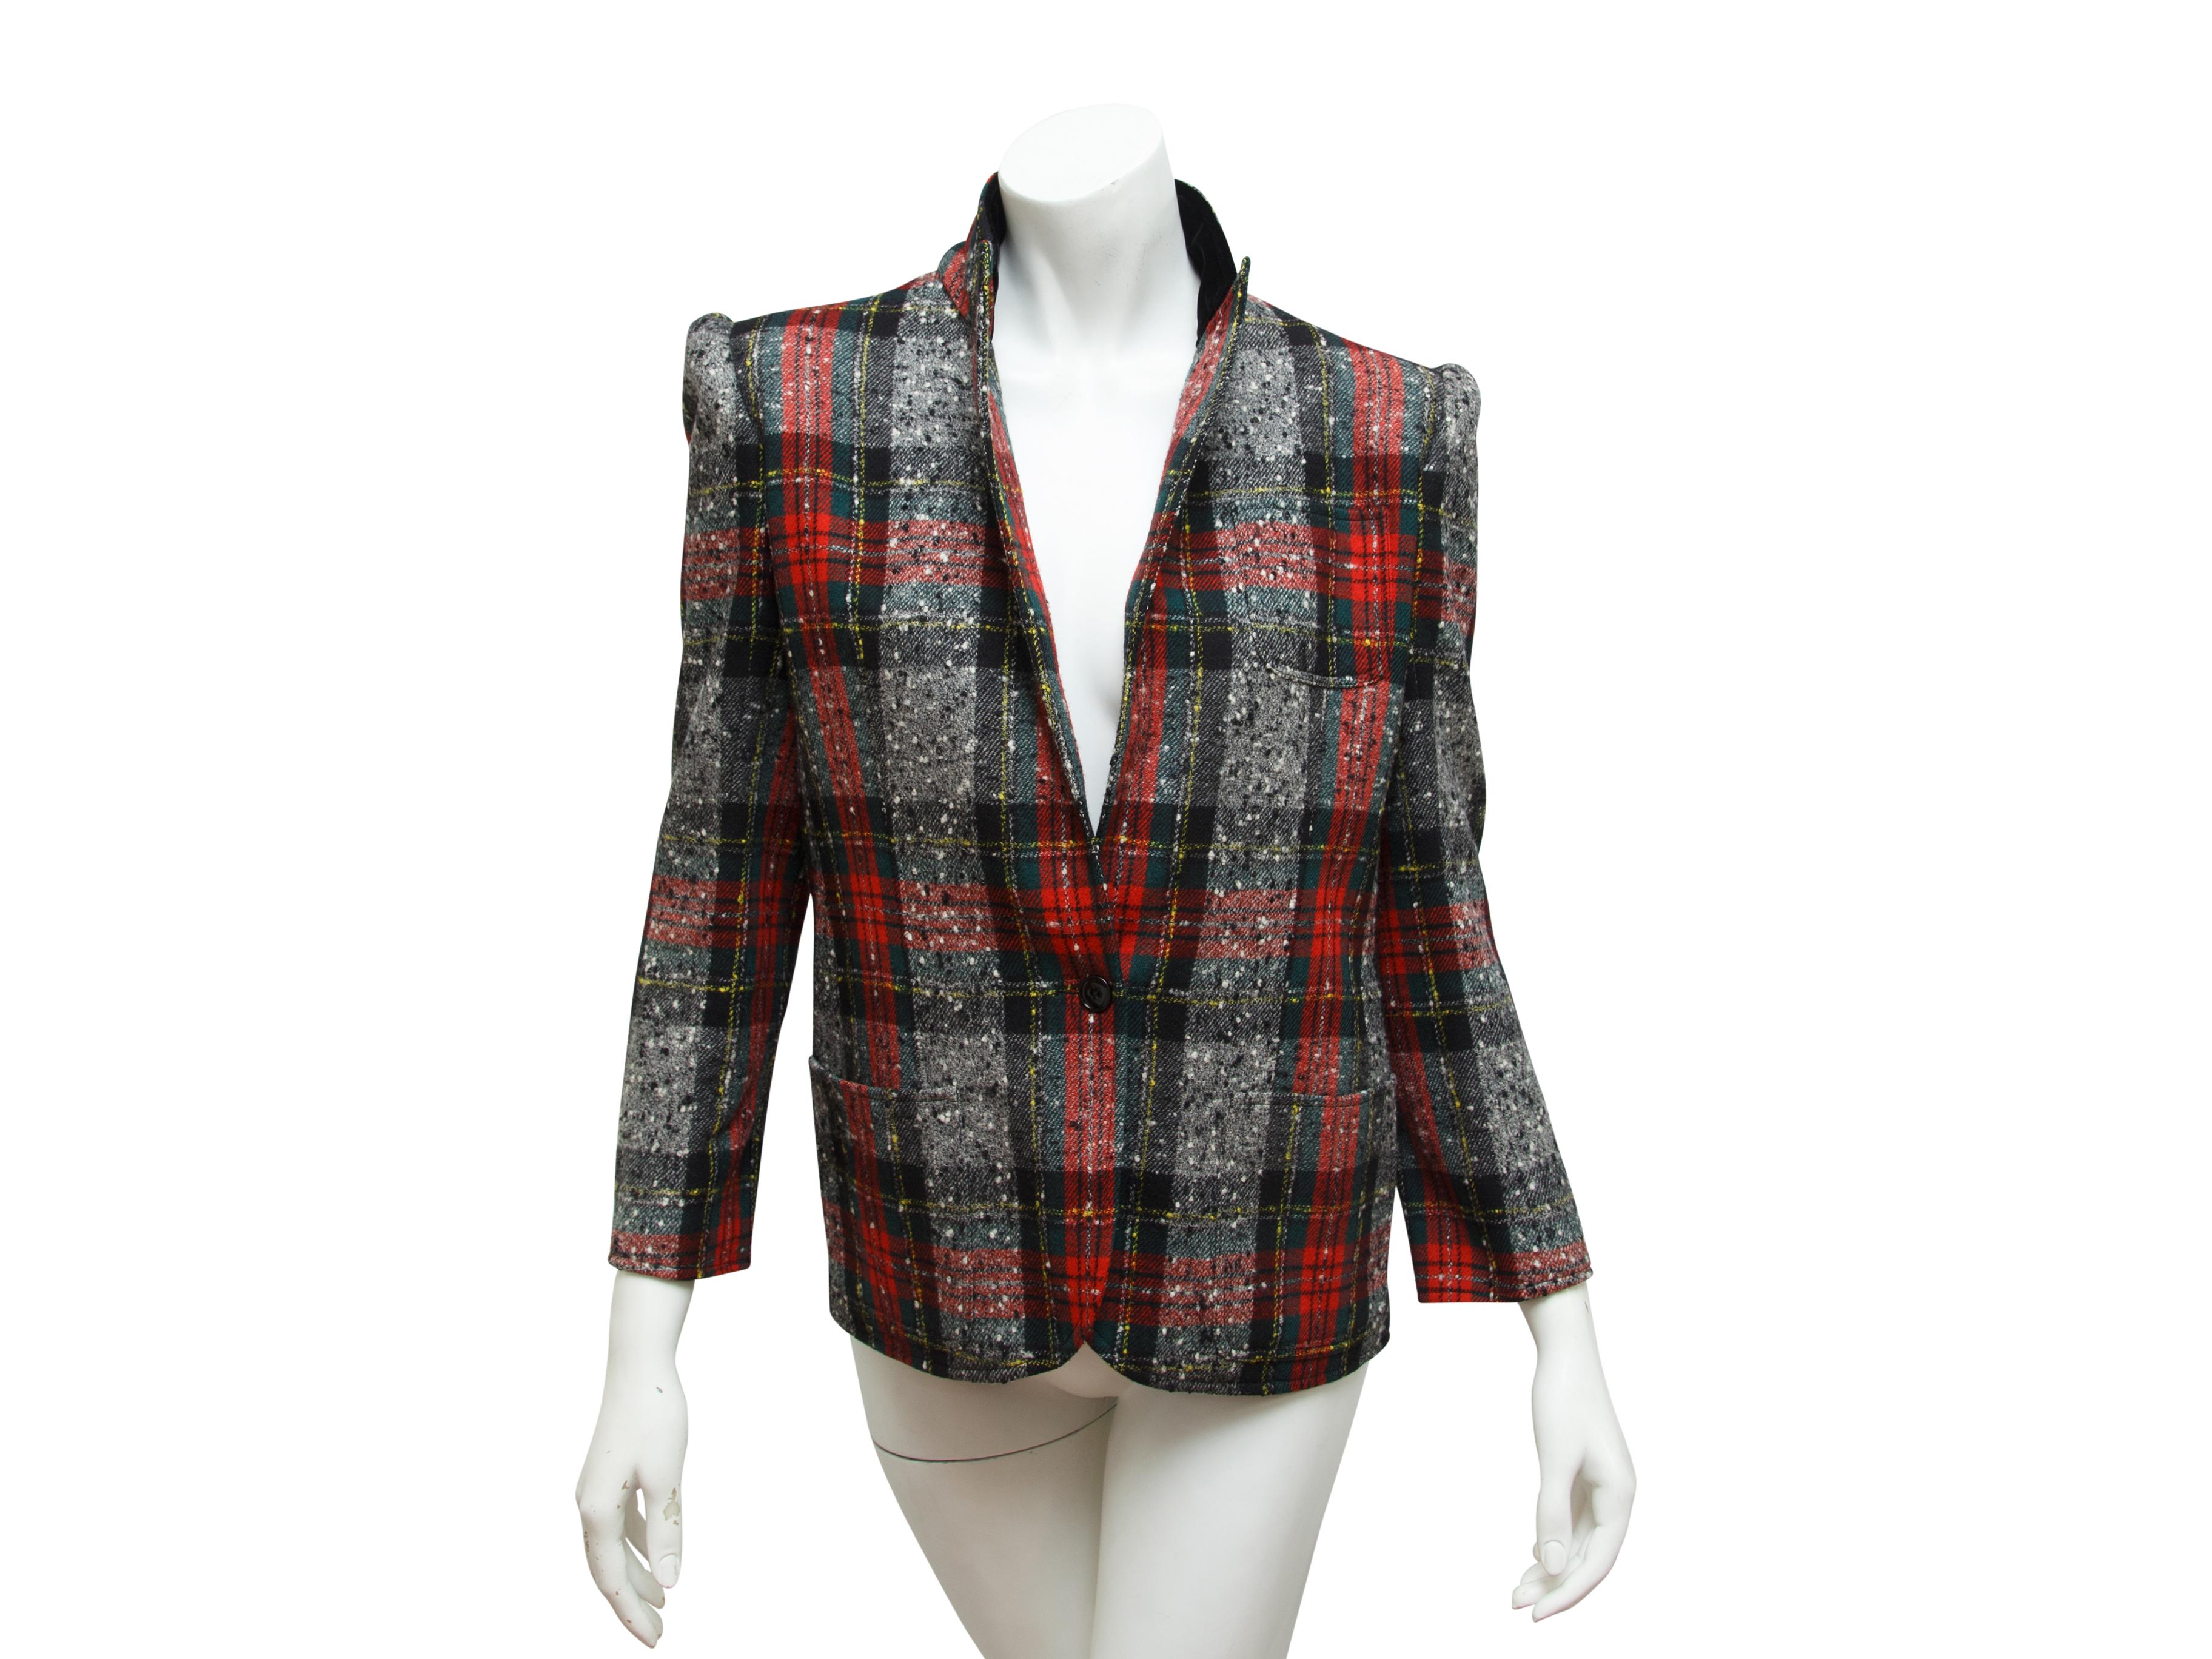 Product details:  Vintage multicolor plaid tweed blazer by Valentino.  Black velvet collar.  Peak lapel.  Long sleeves.  Single-button closure.  Chest and waist patch pockets.  35